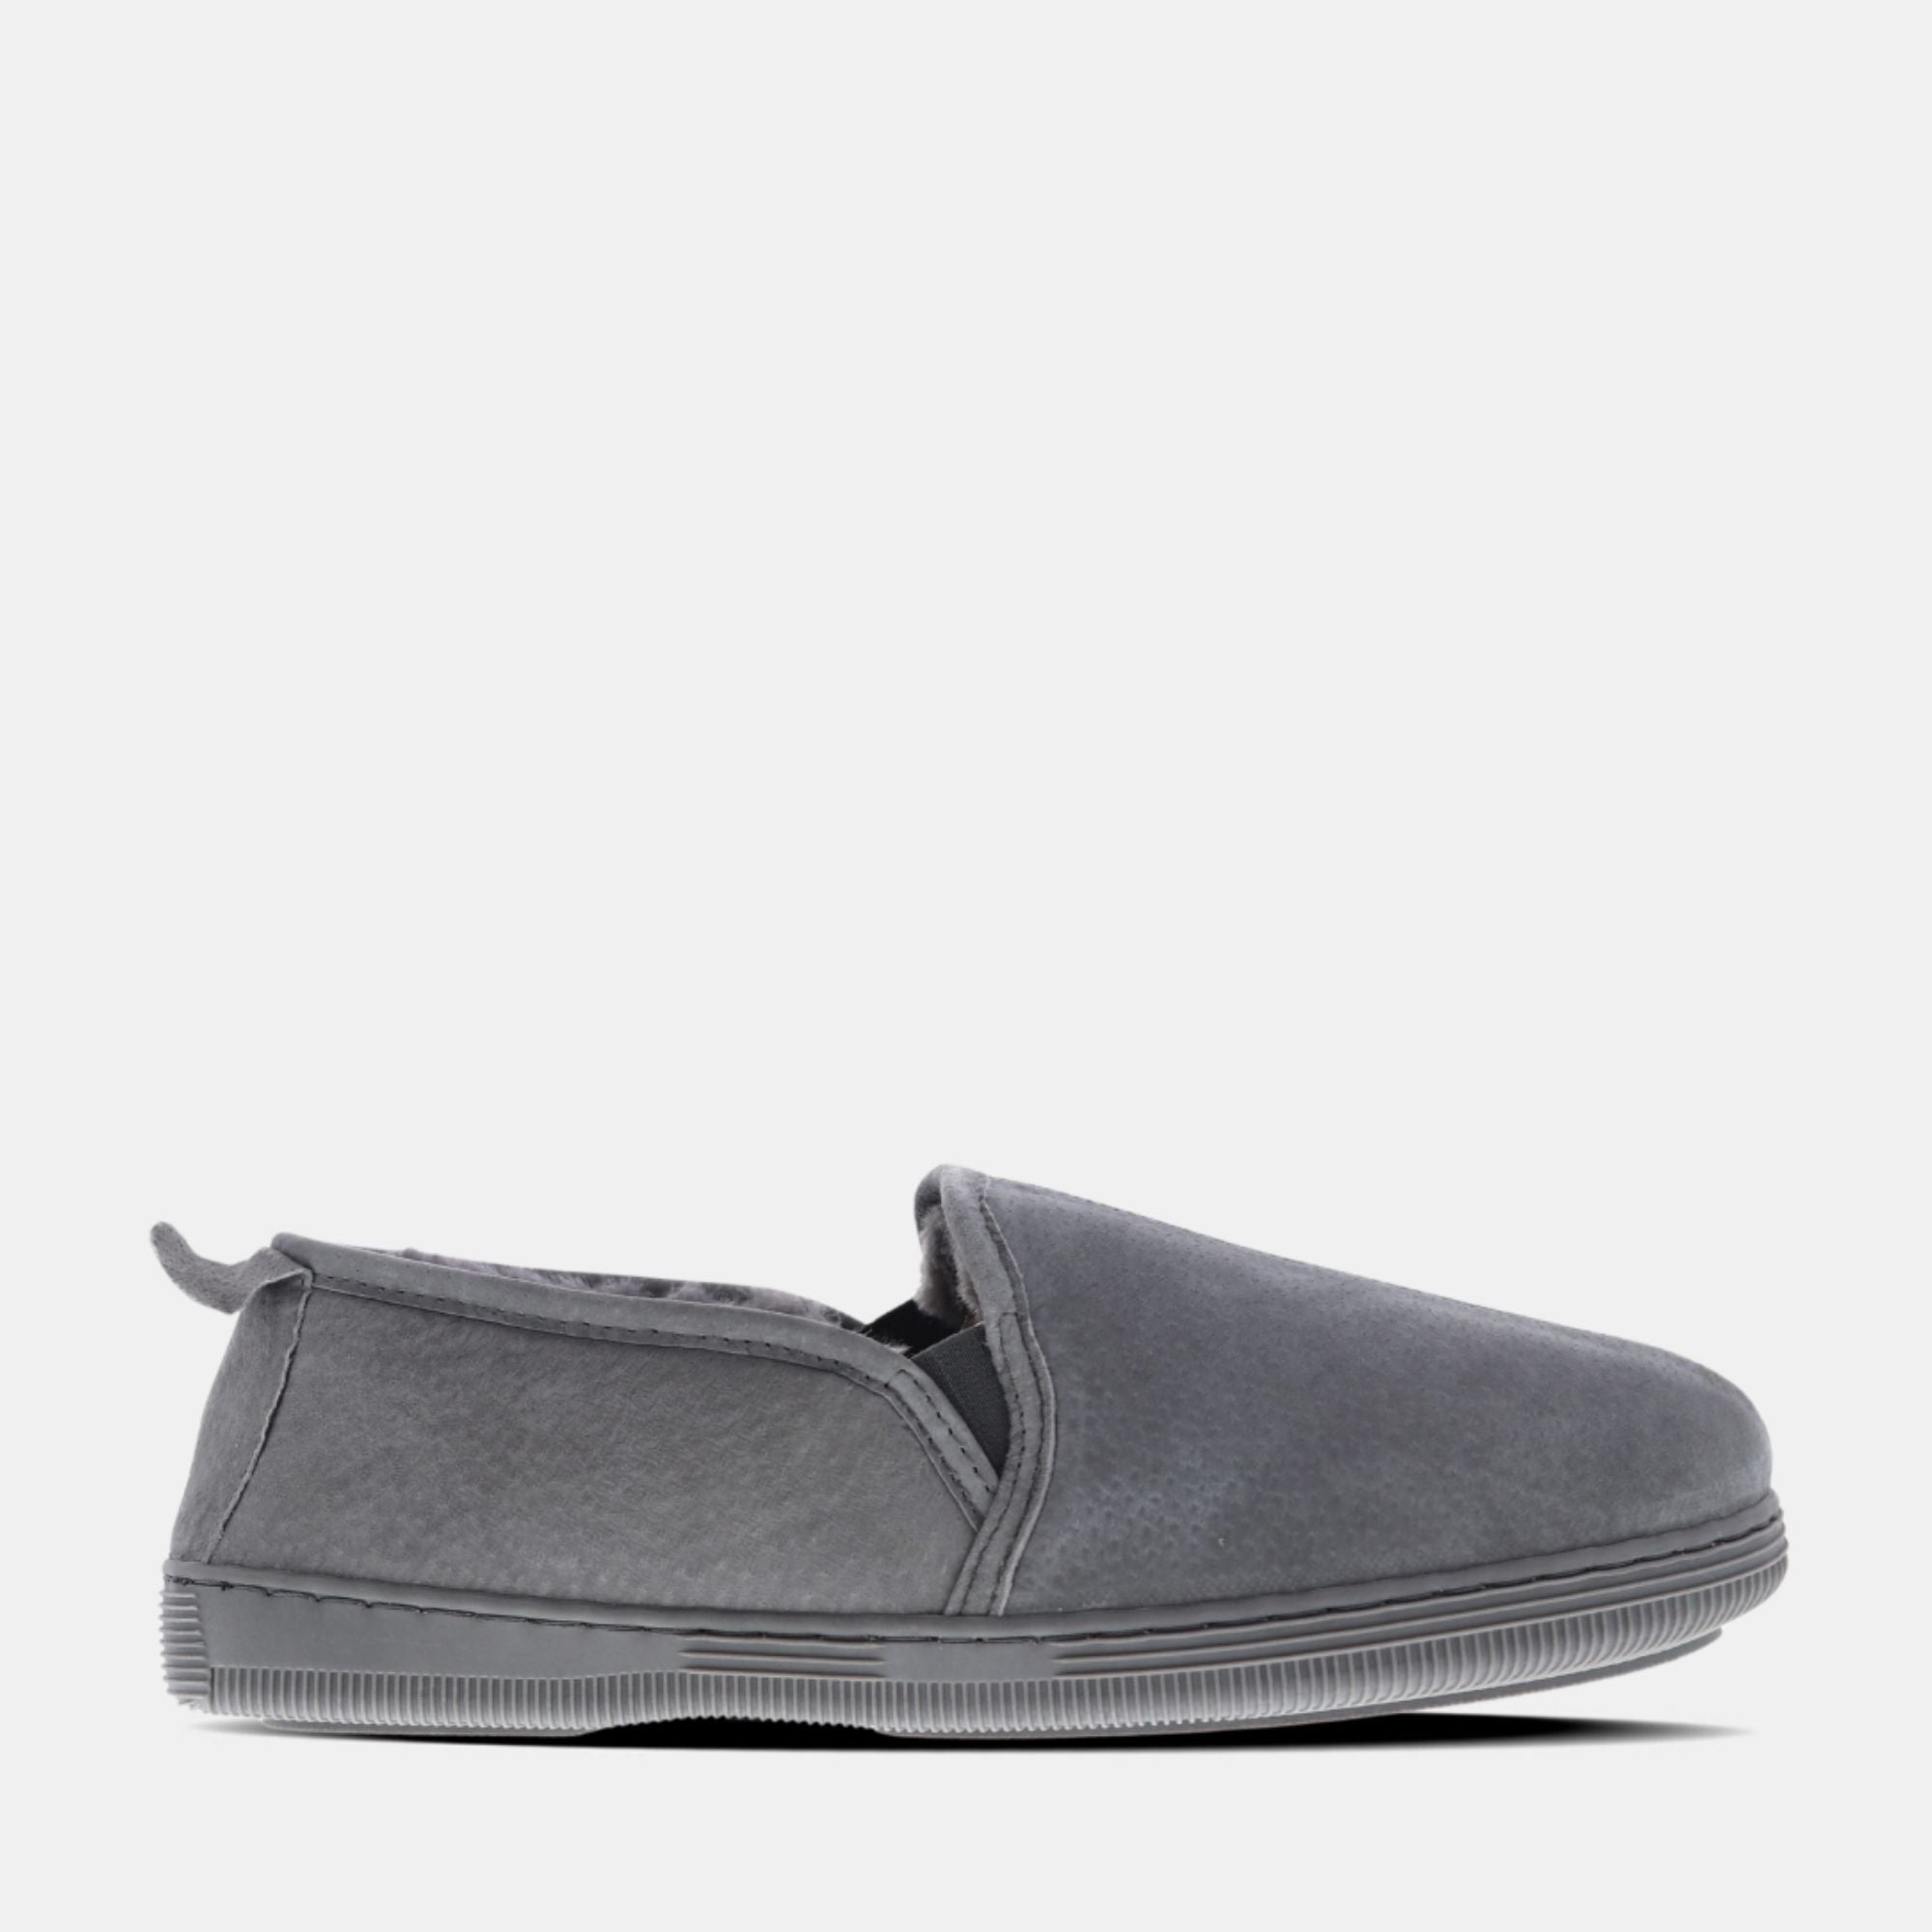 RomeoSlipperOutlet Charcoal